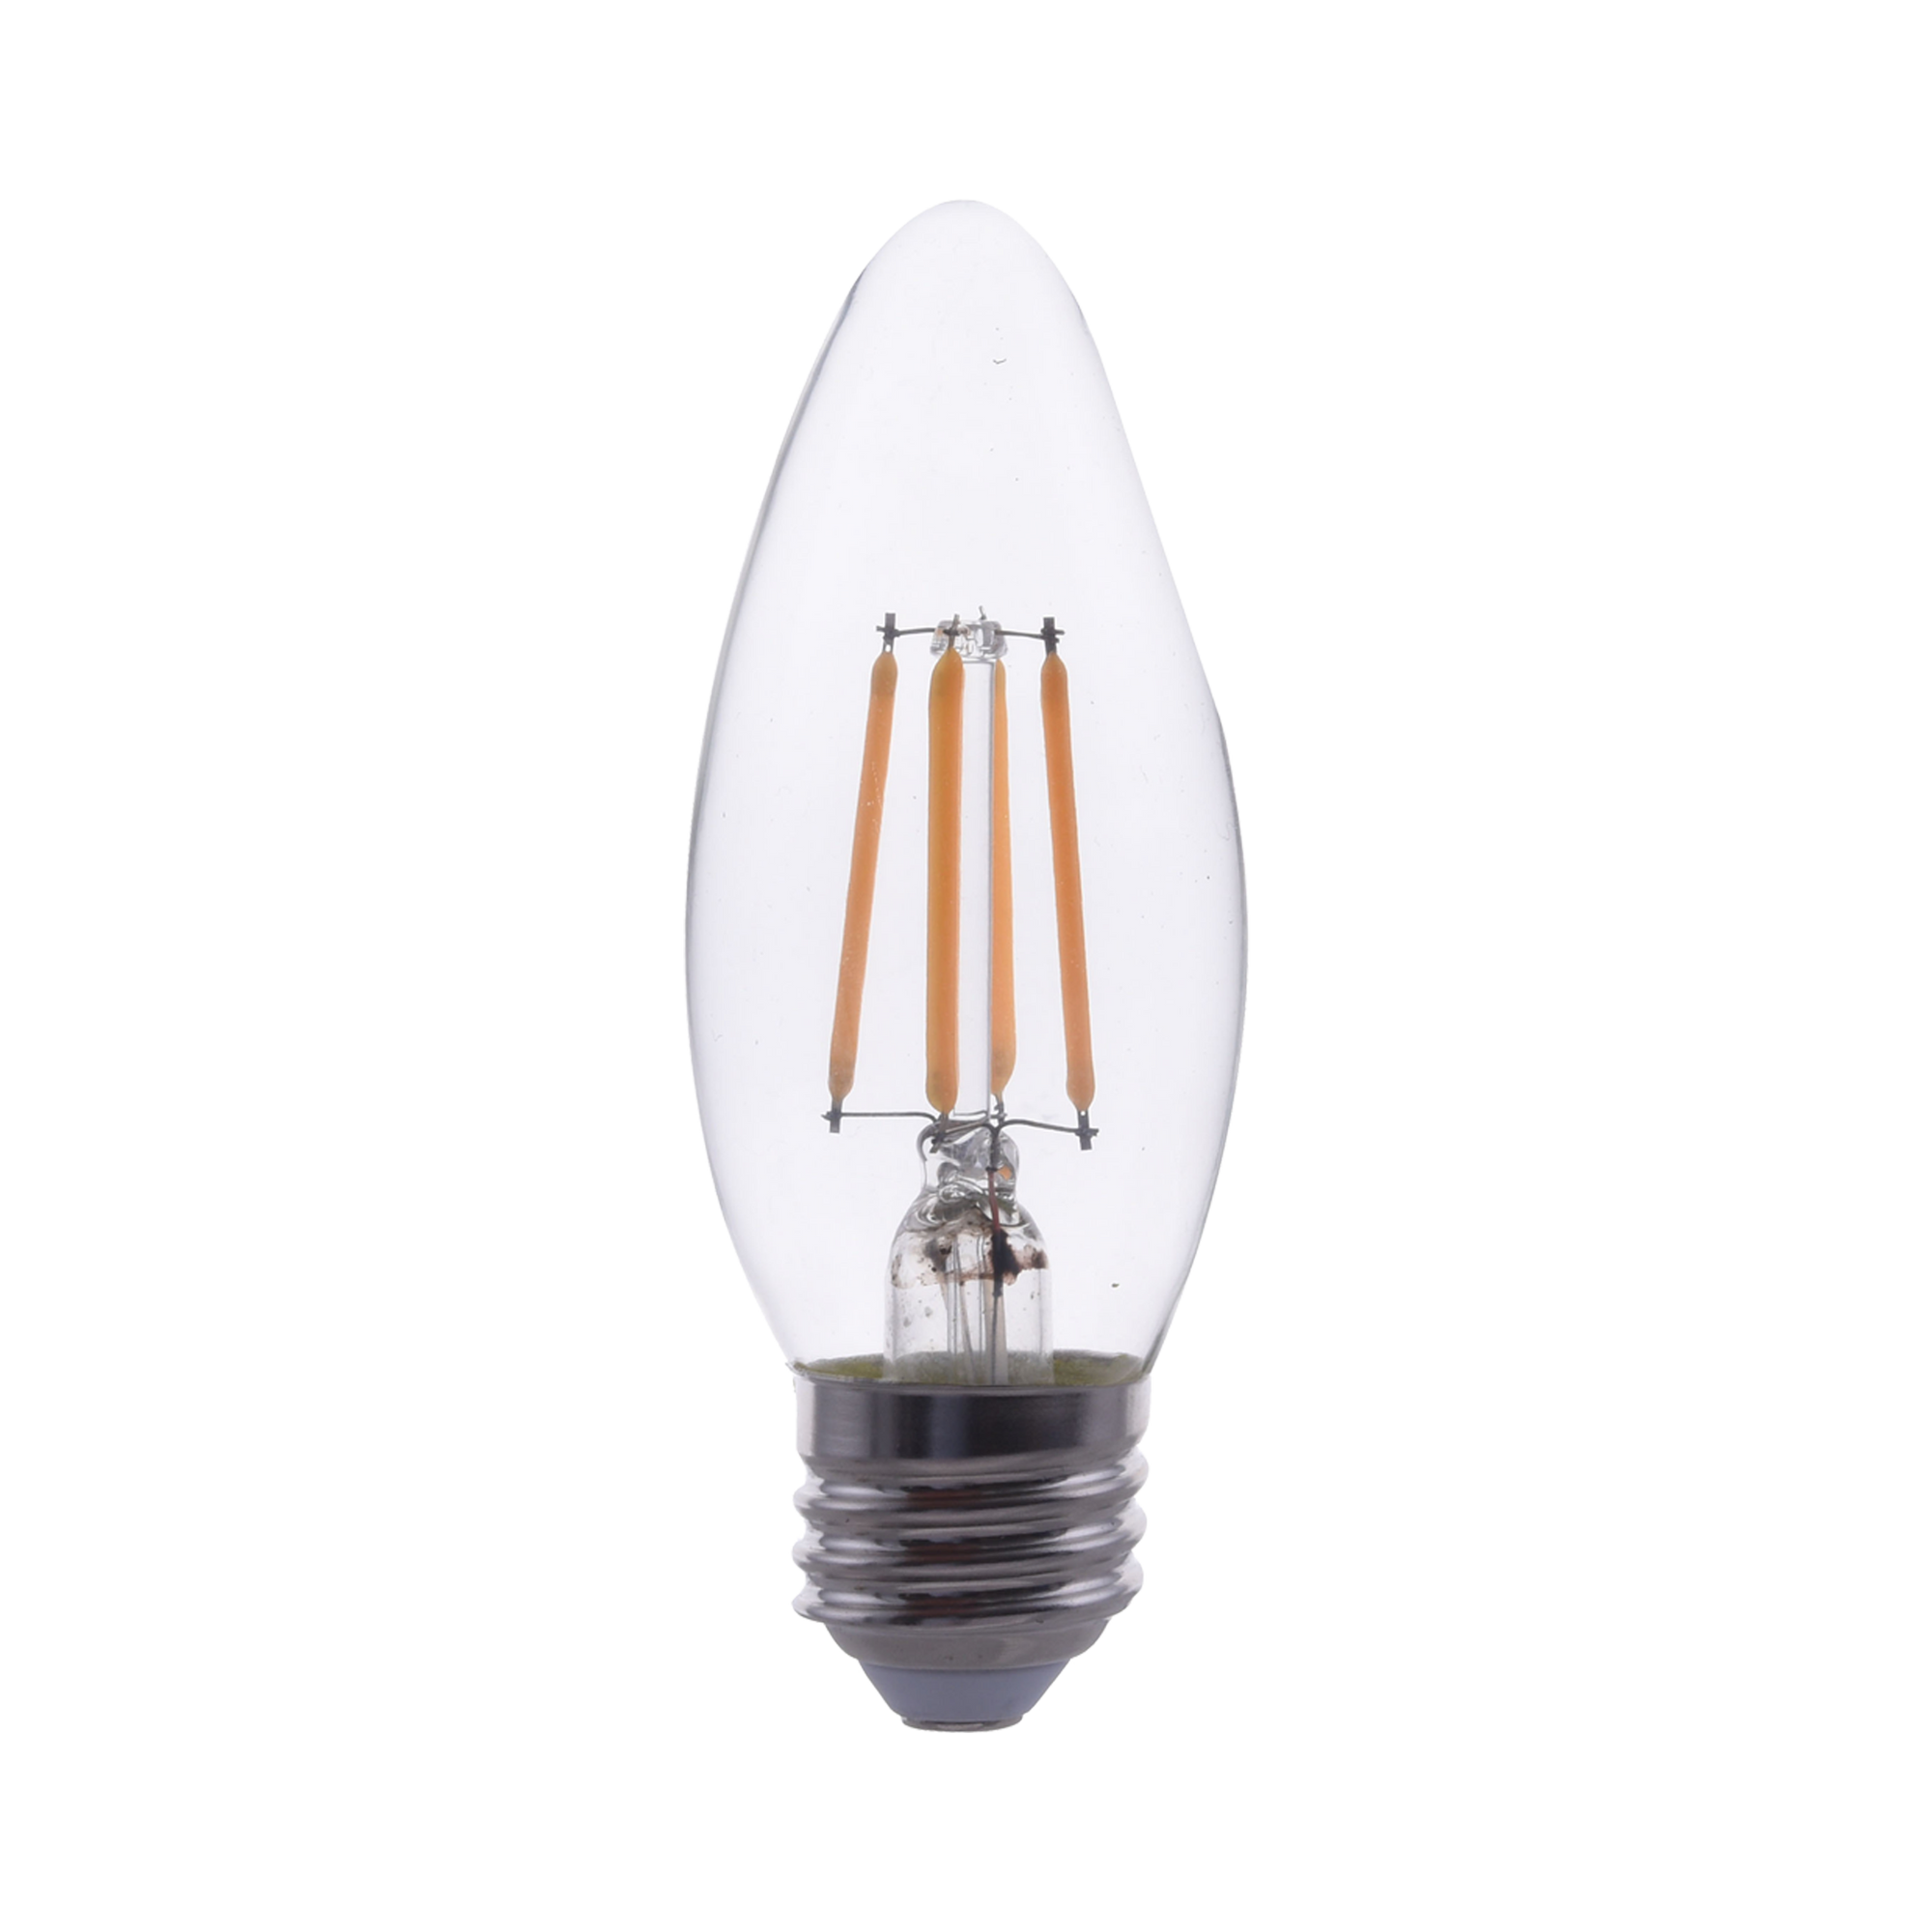 The Candelabra LED Bulb features a bright, warm light.